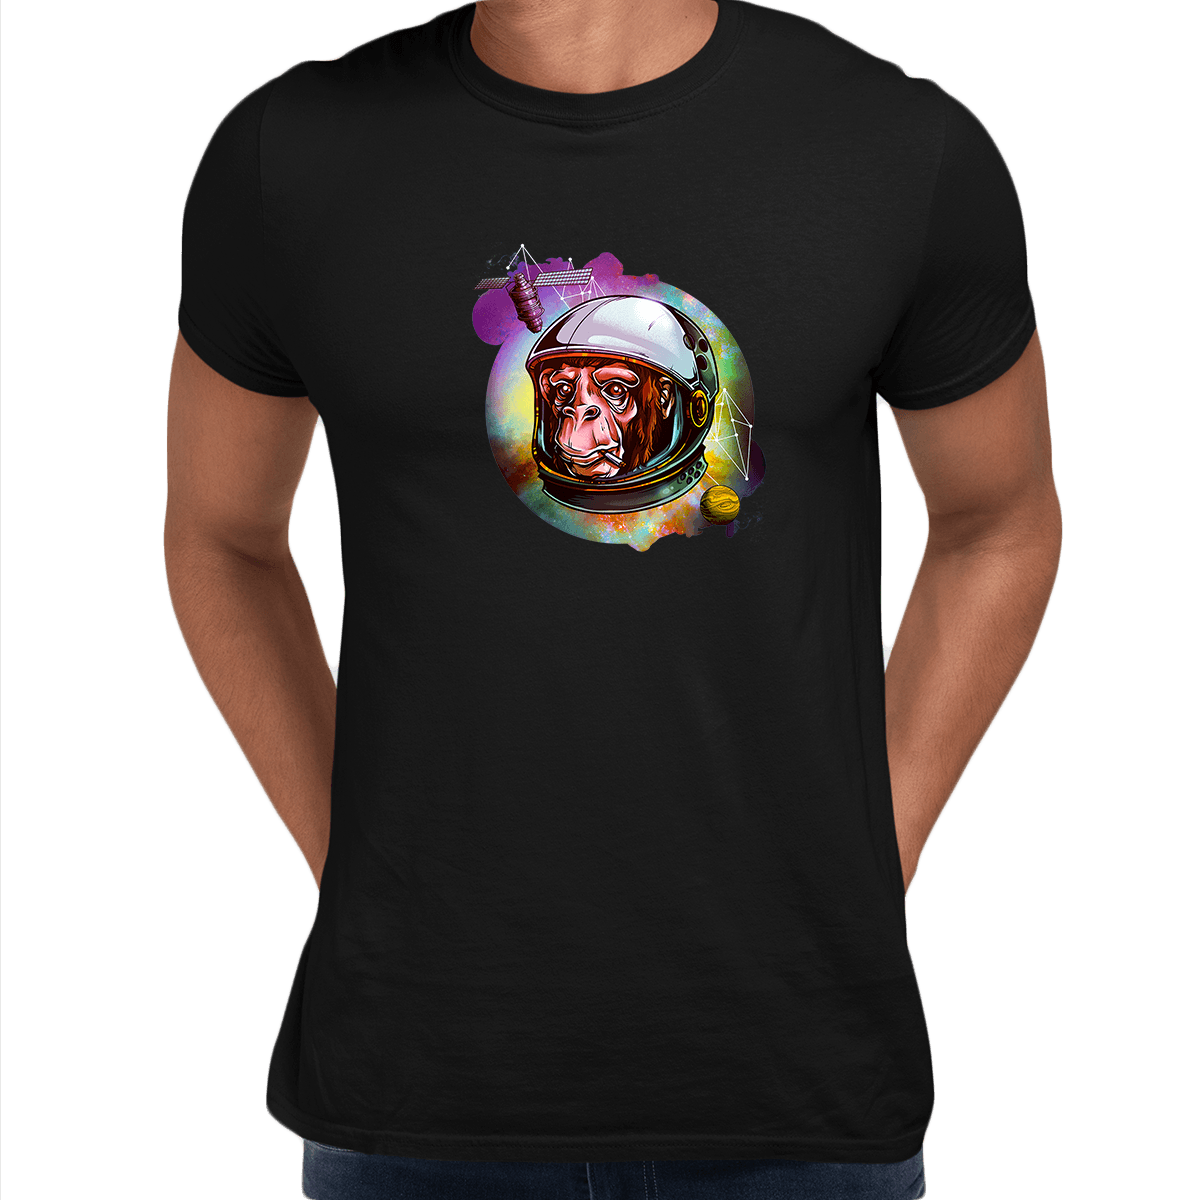 Awesome Cosmic Chimp T-Shirt with an Attitude - Kuzi Tees